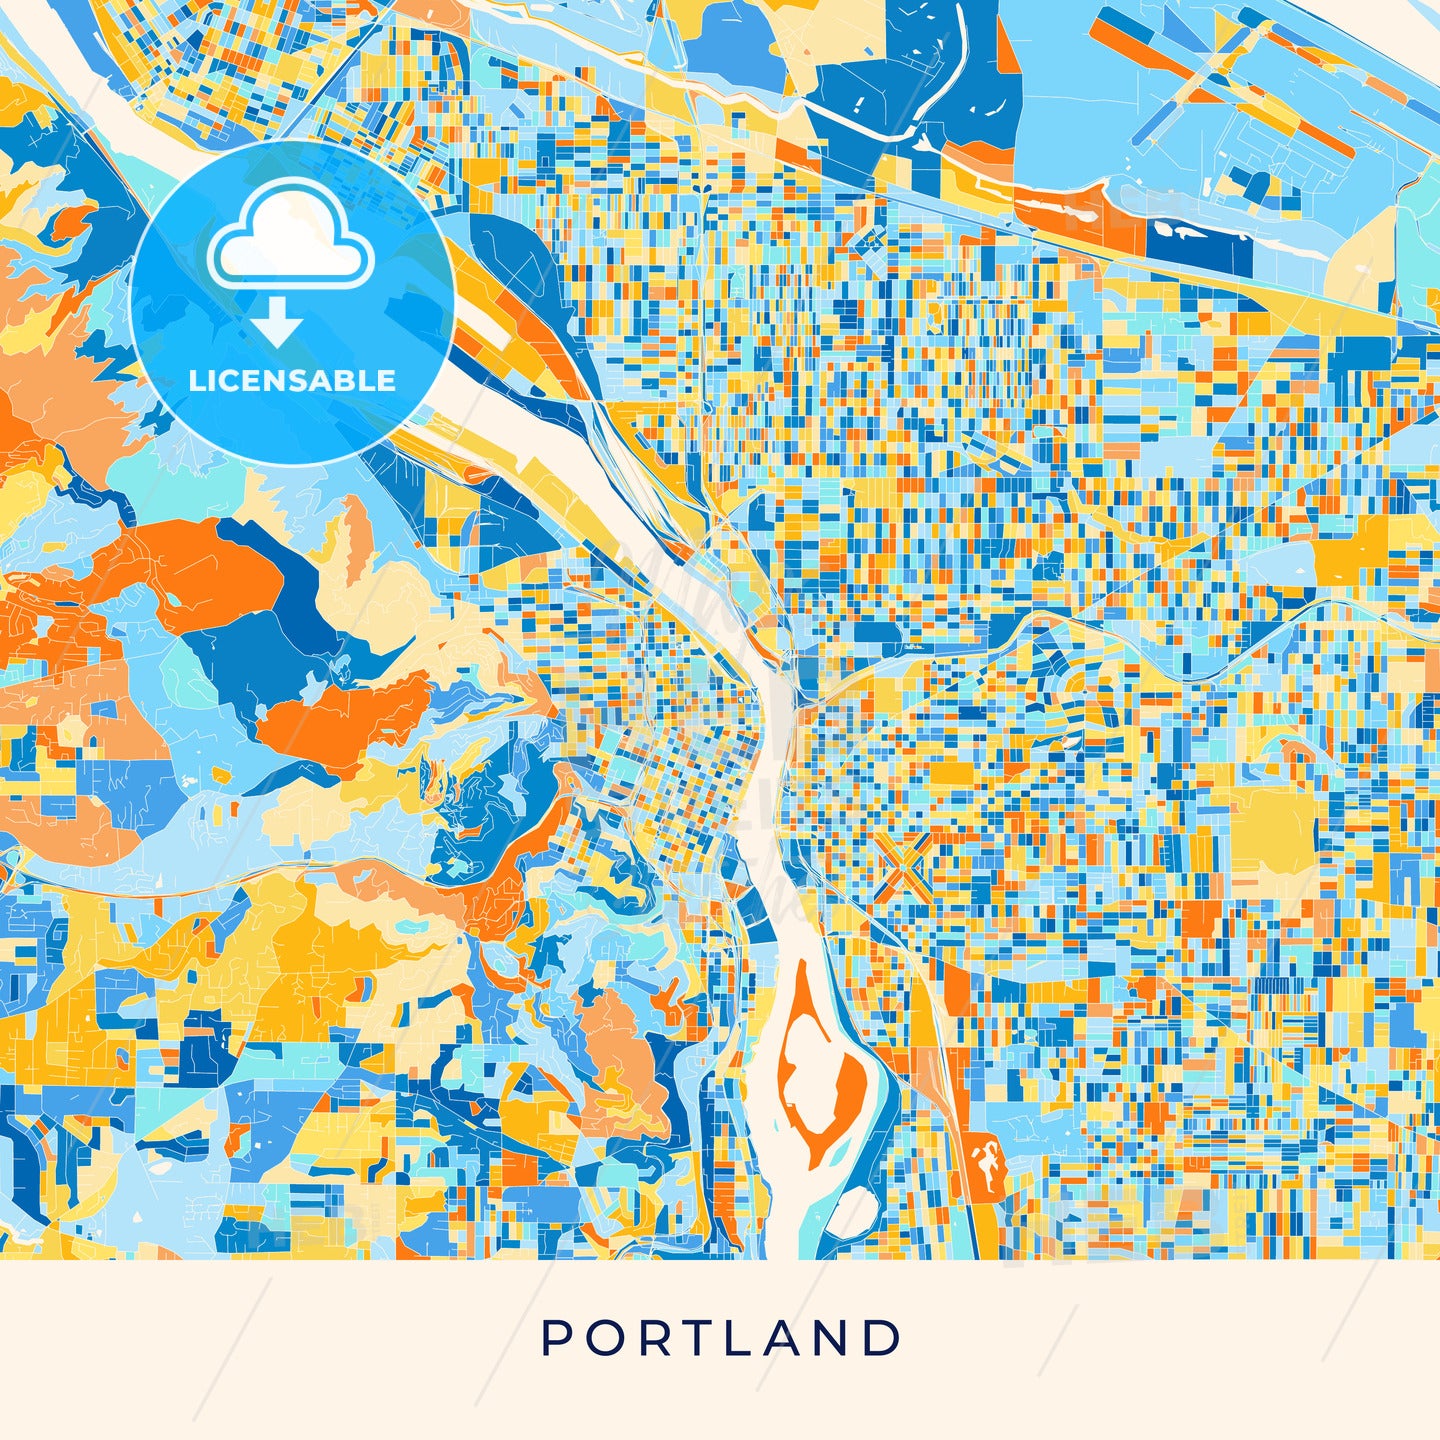 Portland colorful map poster template